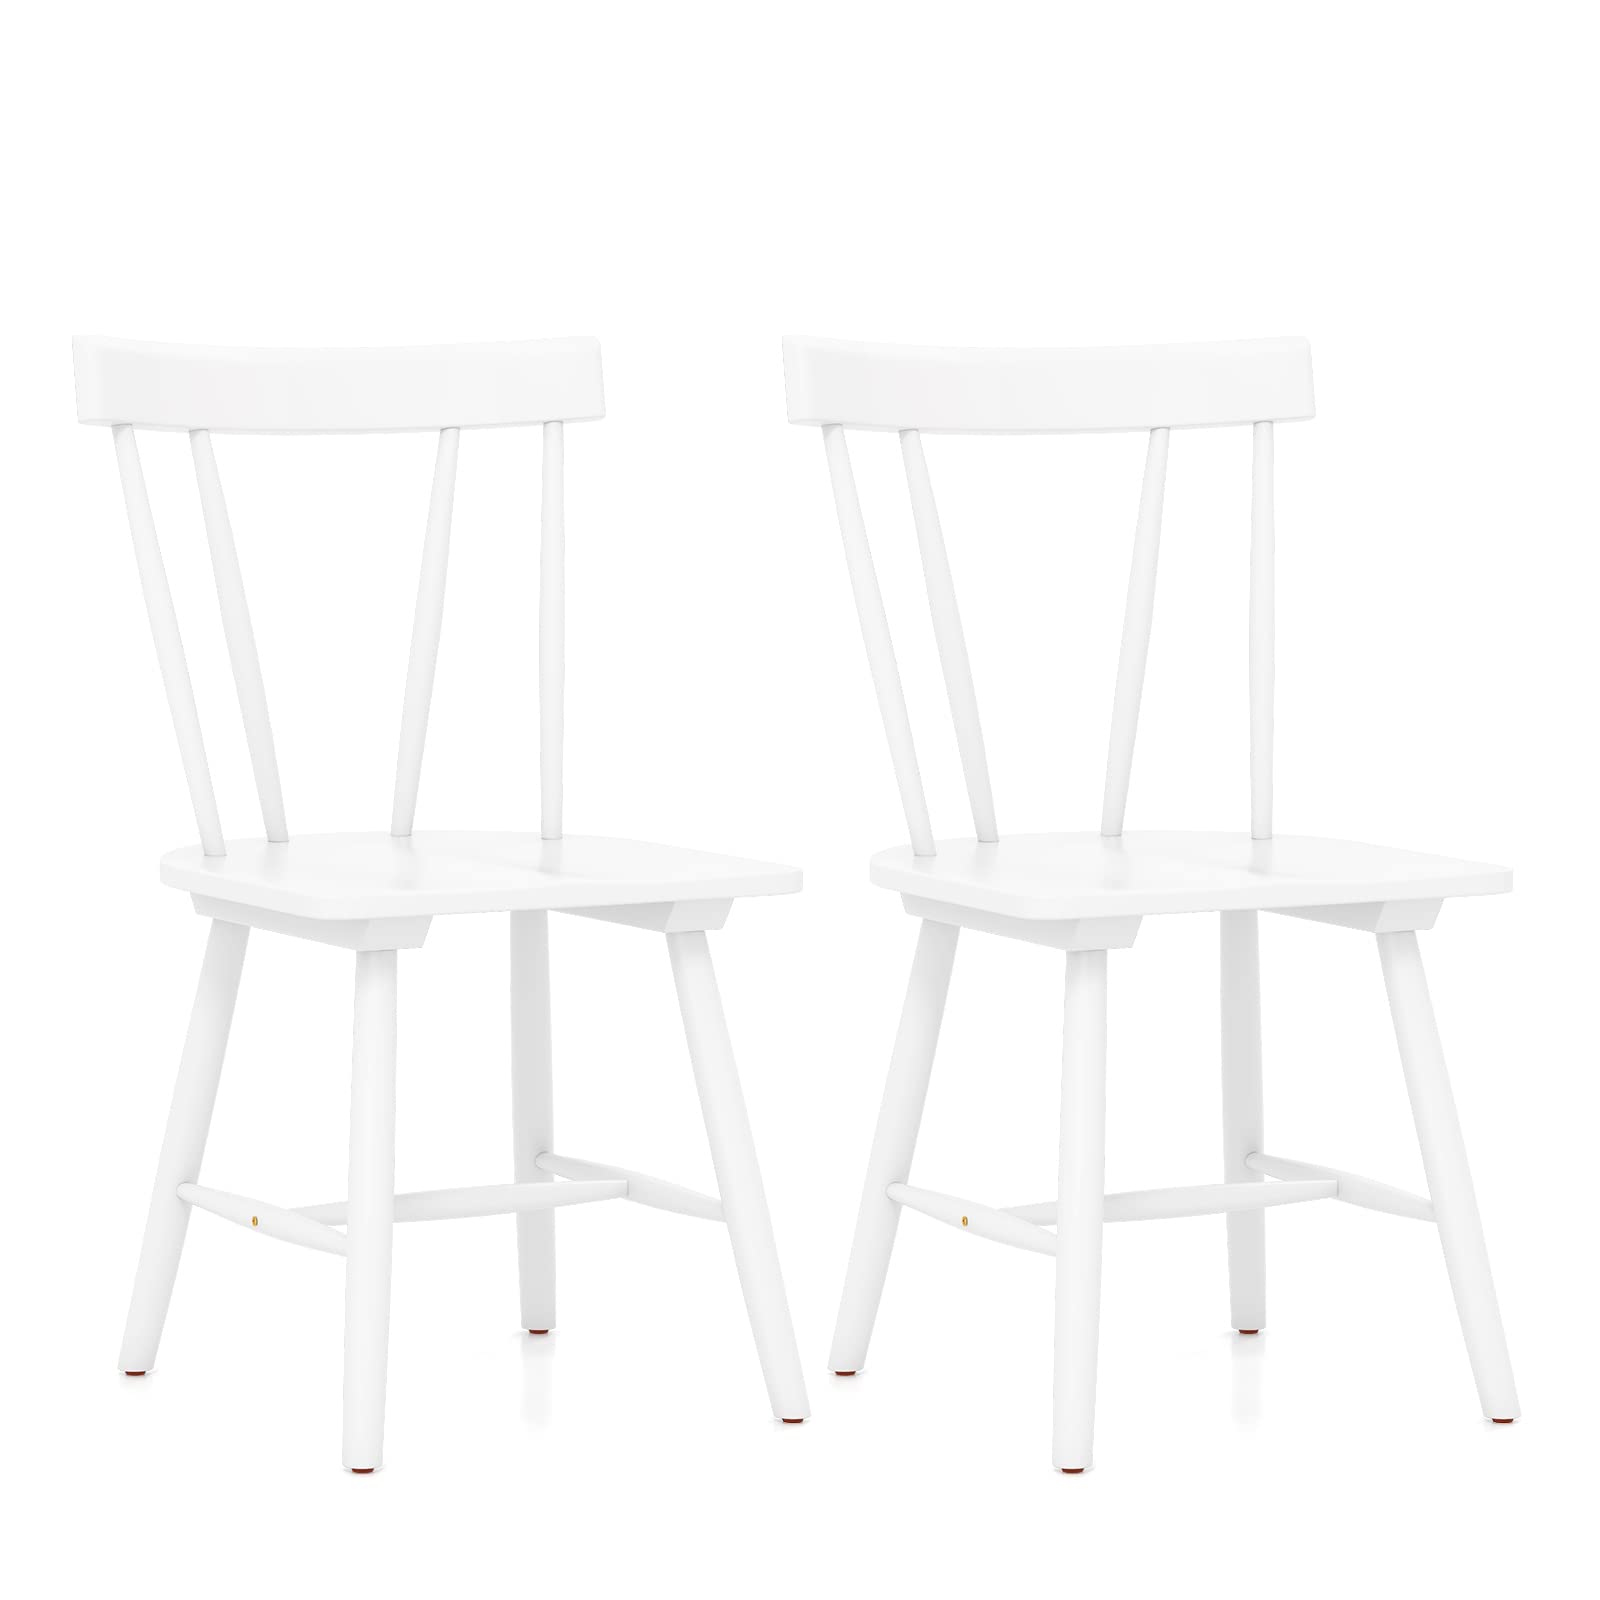 Giantex Windsor Chairs, Armless Dining Chairs with Solid Rubber Wood Frame